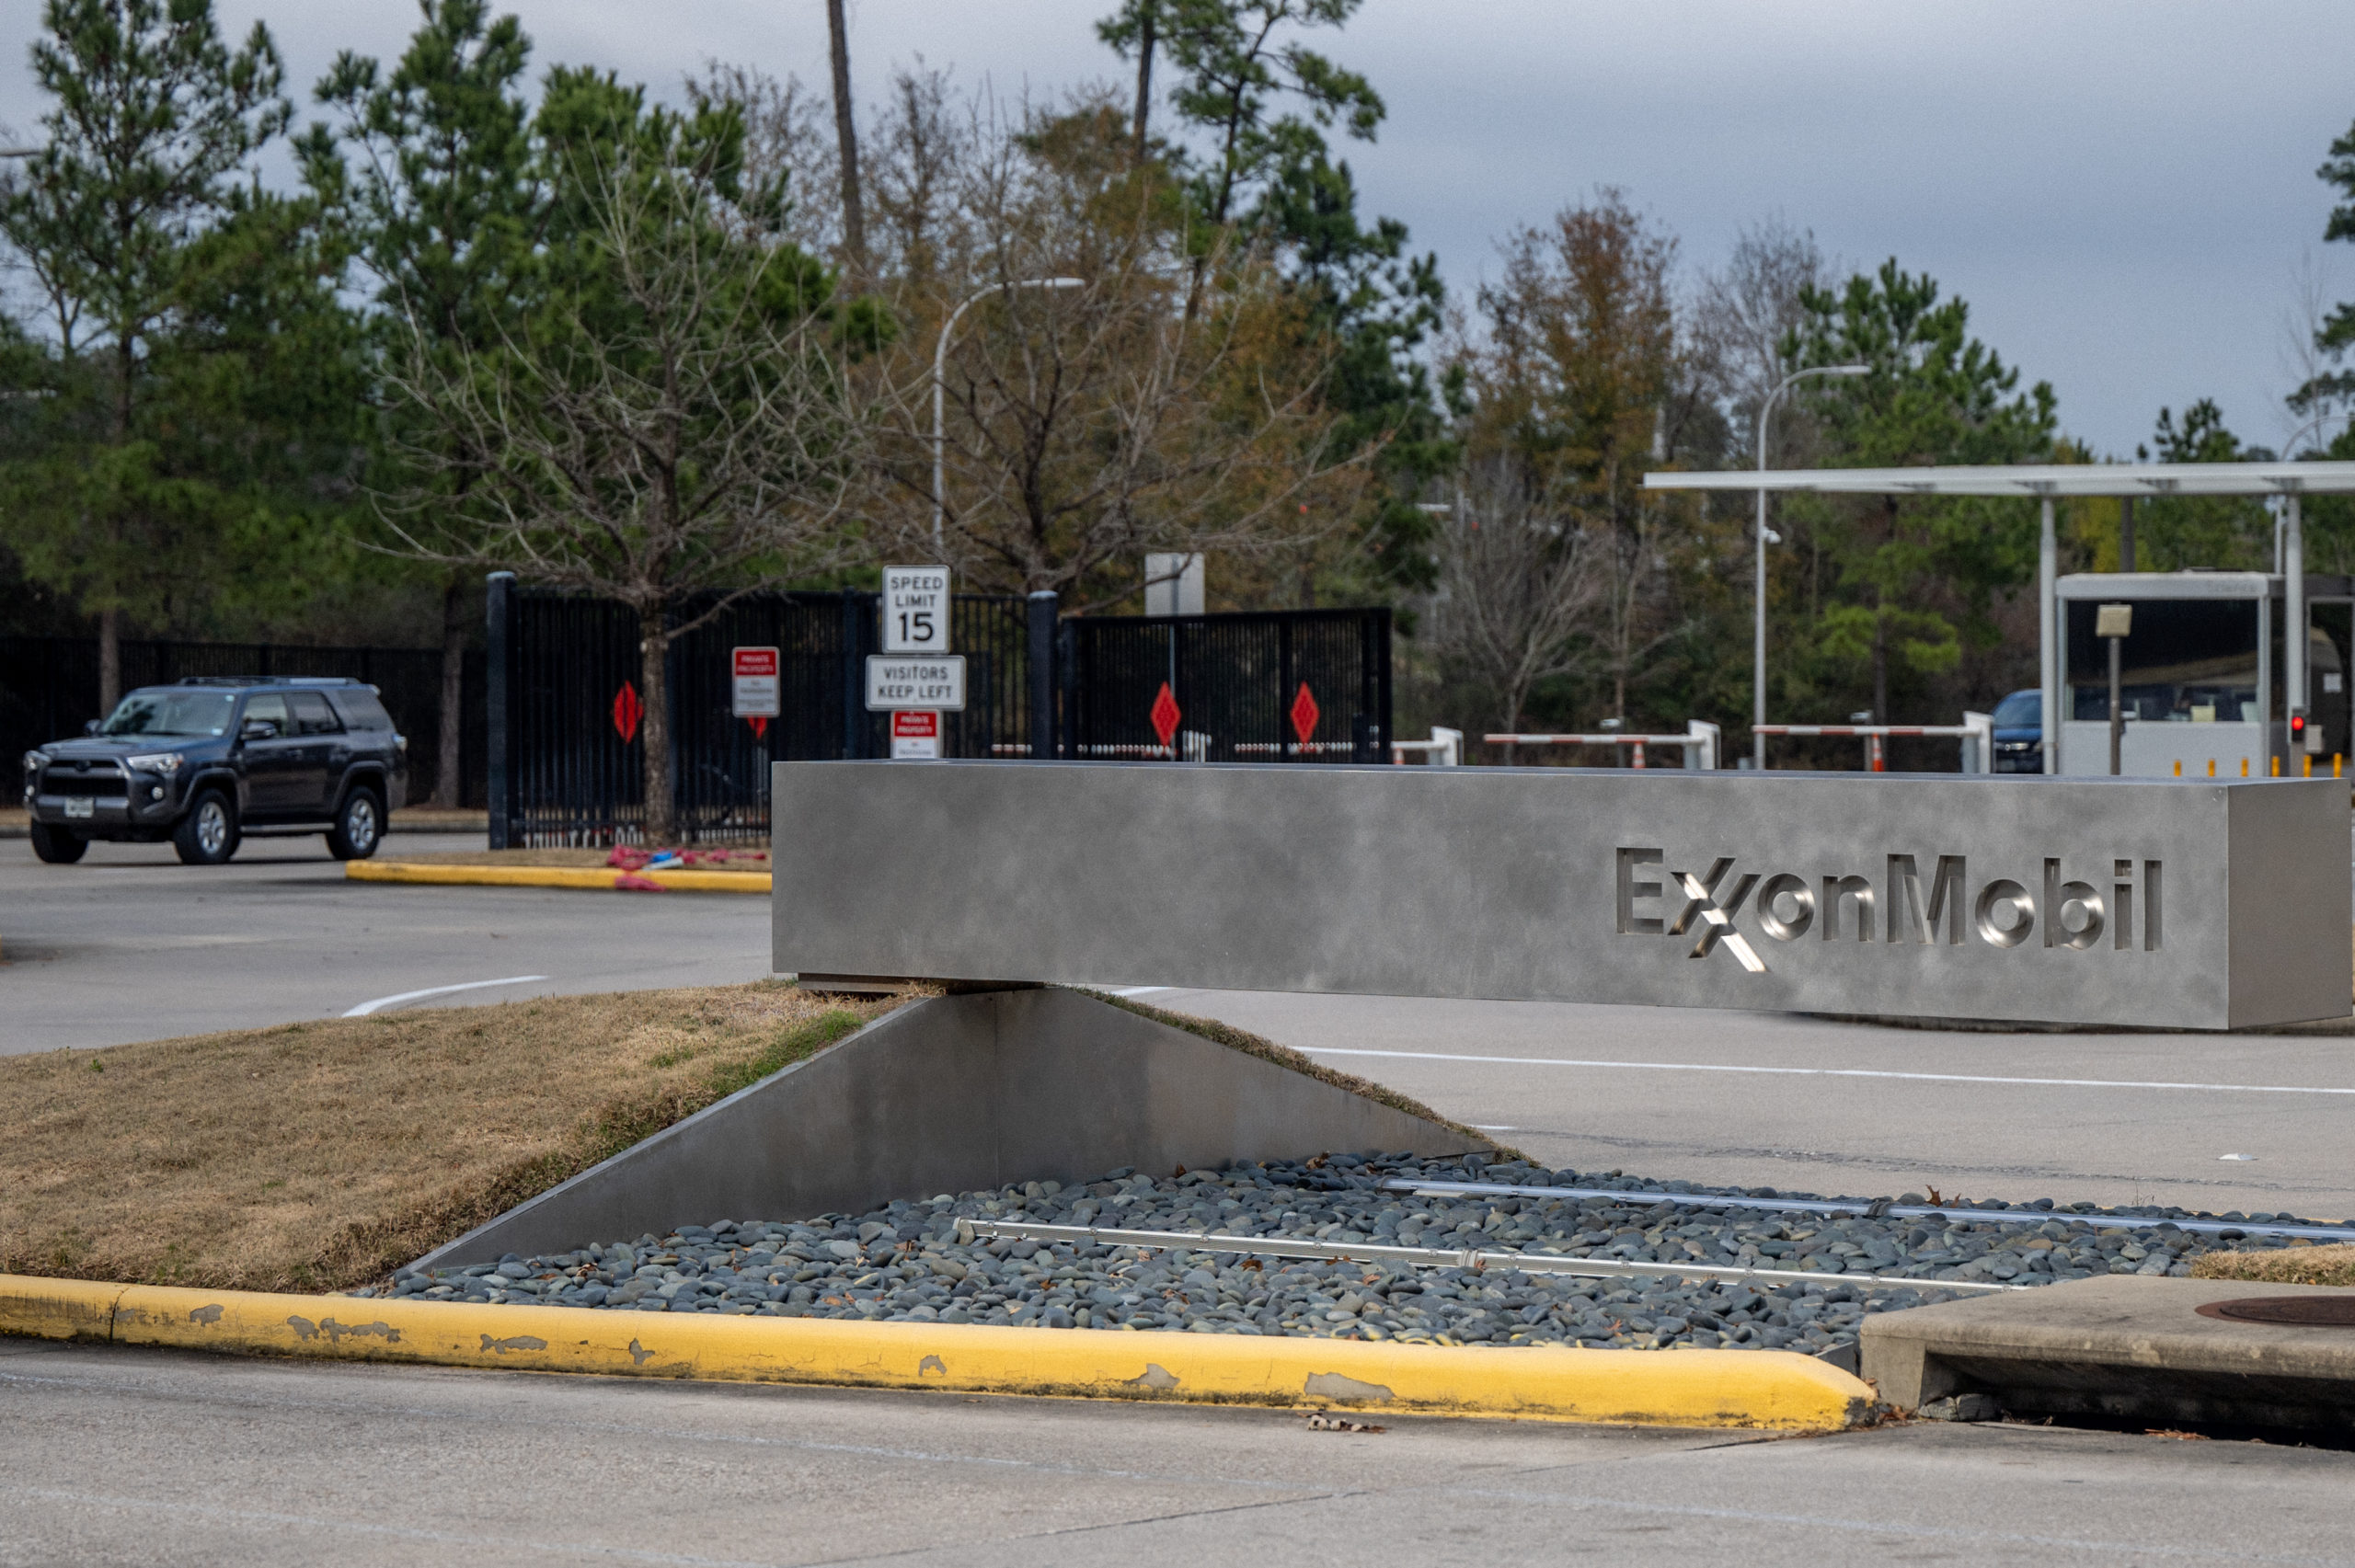 An entrance to the ExxonMobil headquarters is pictured on Feb. 1 in Houston, Texas. (Brandon Bell/Getty Images)